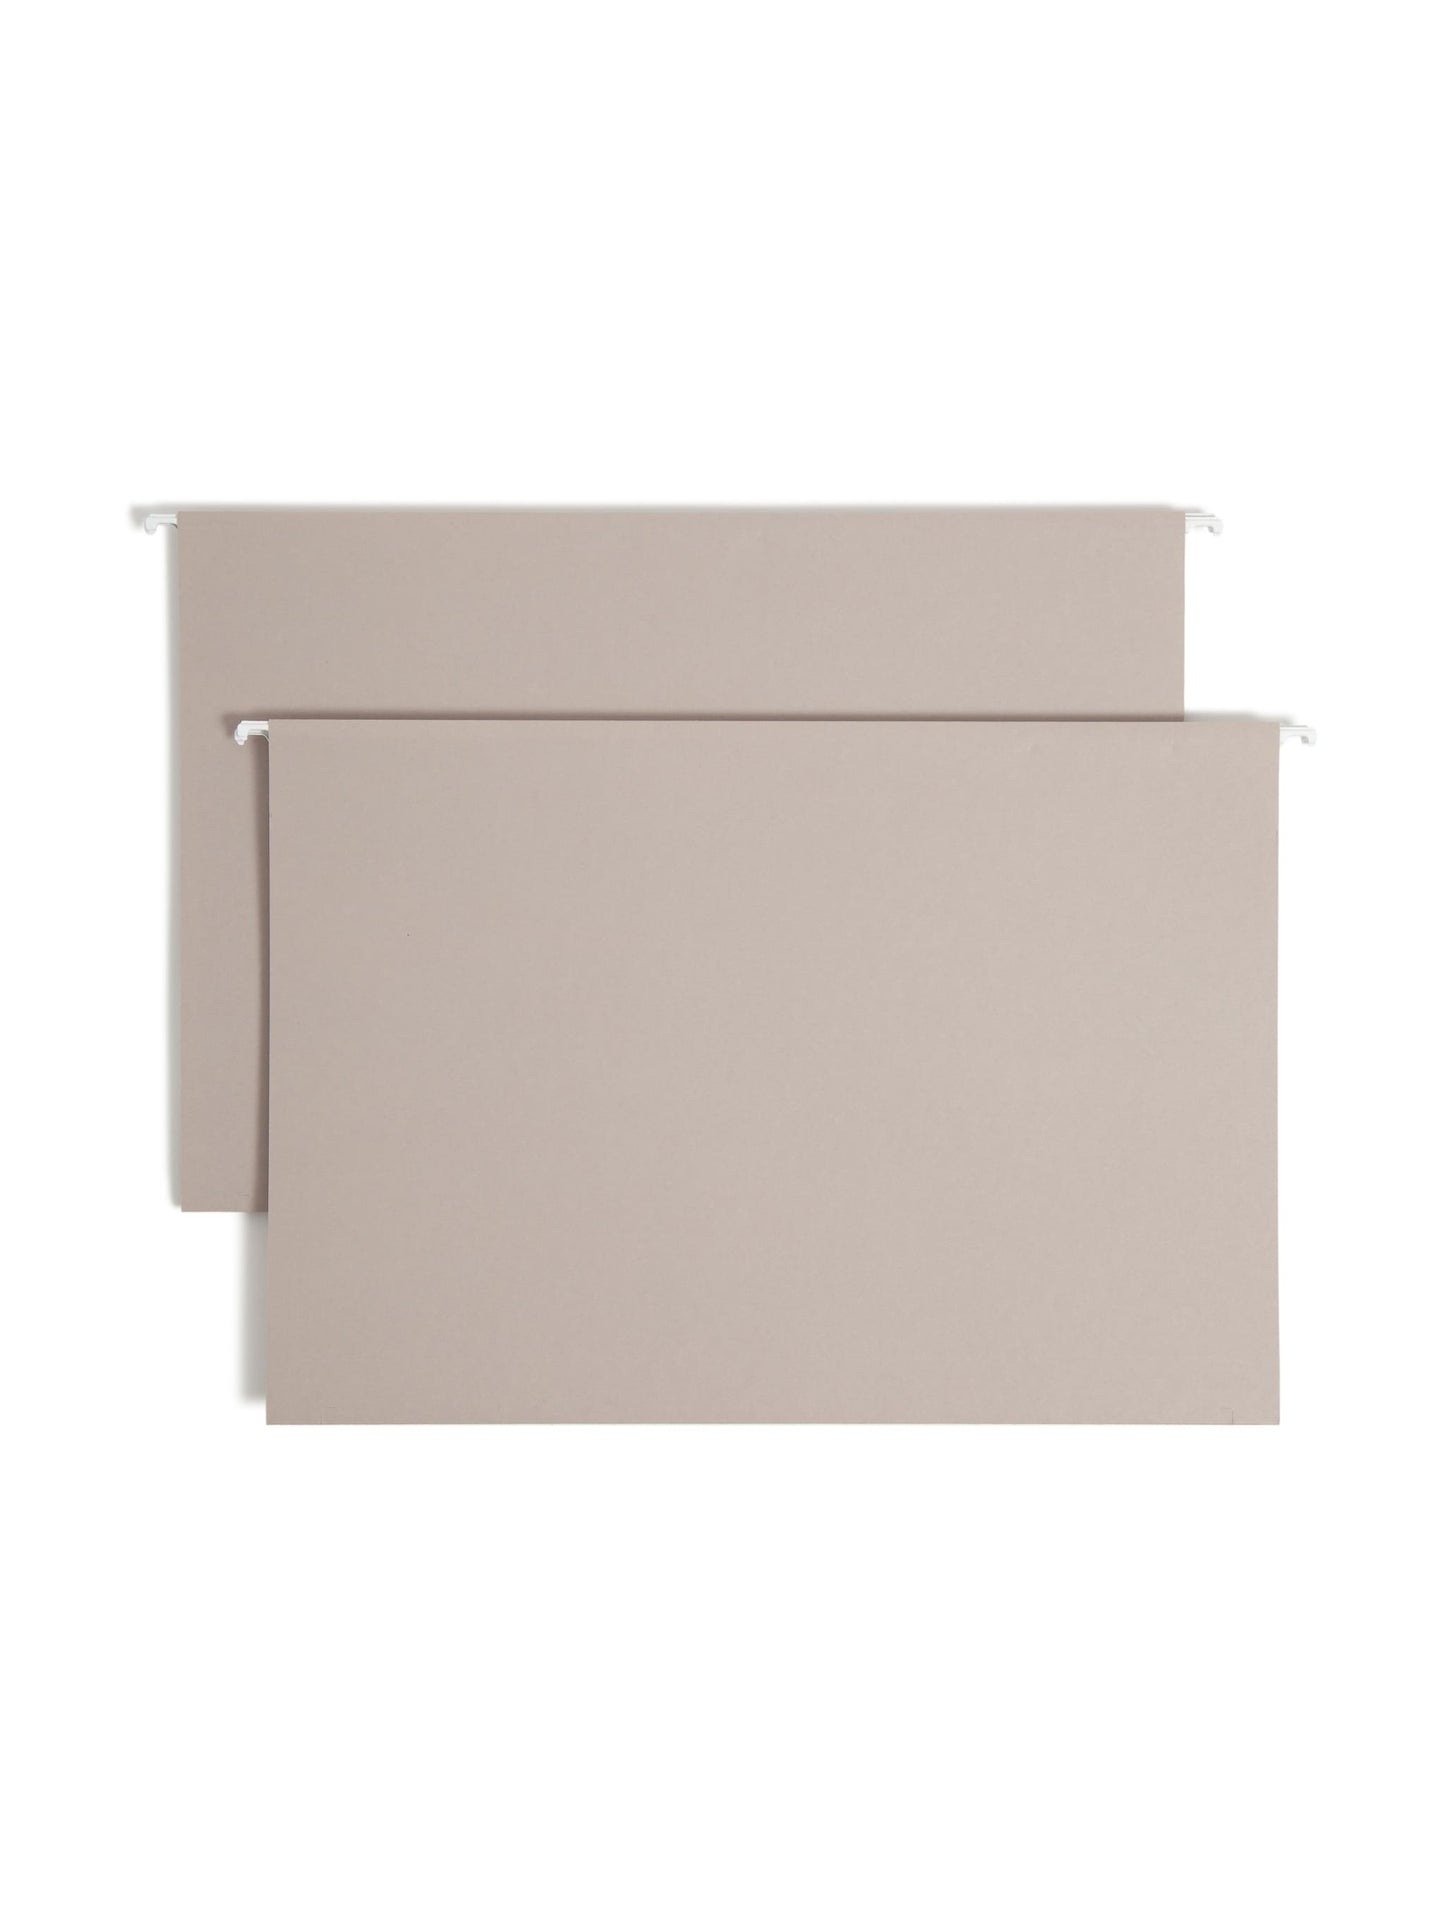 TUFF® Hanging Box Bottom File Folders with Easy Slide® Tabs, 2 inch Expansion, Gray Color, Legal Size, Set of 18, 086486643405